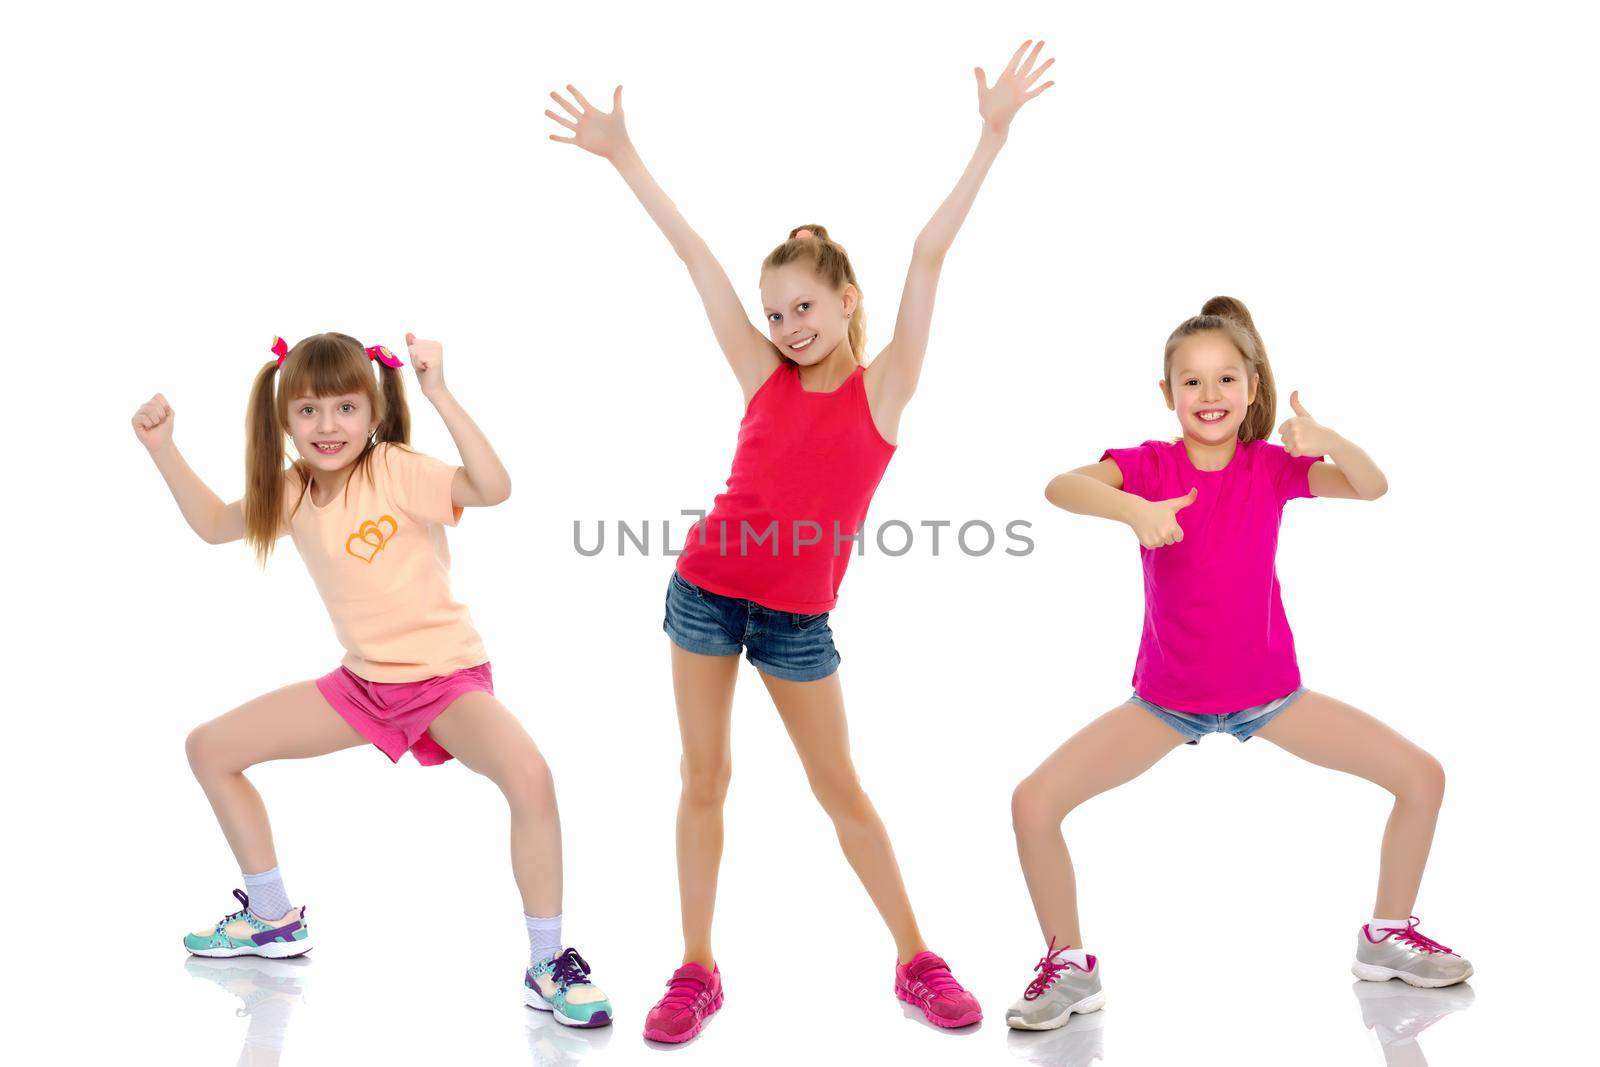 A group of cheerful, emotional children keep their thumbs up. The concept of advertising, sports and fitness. Isolated on white background.